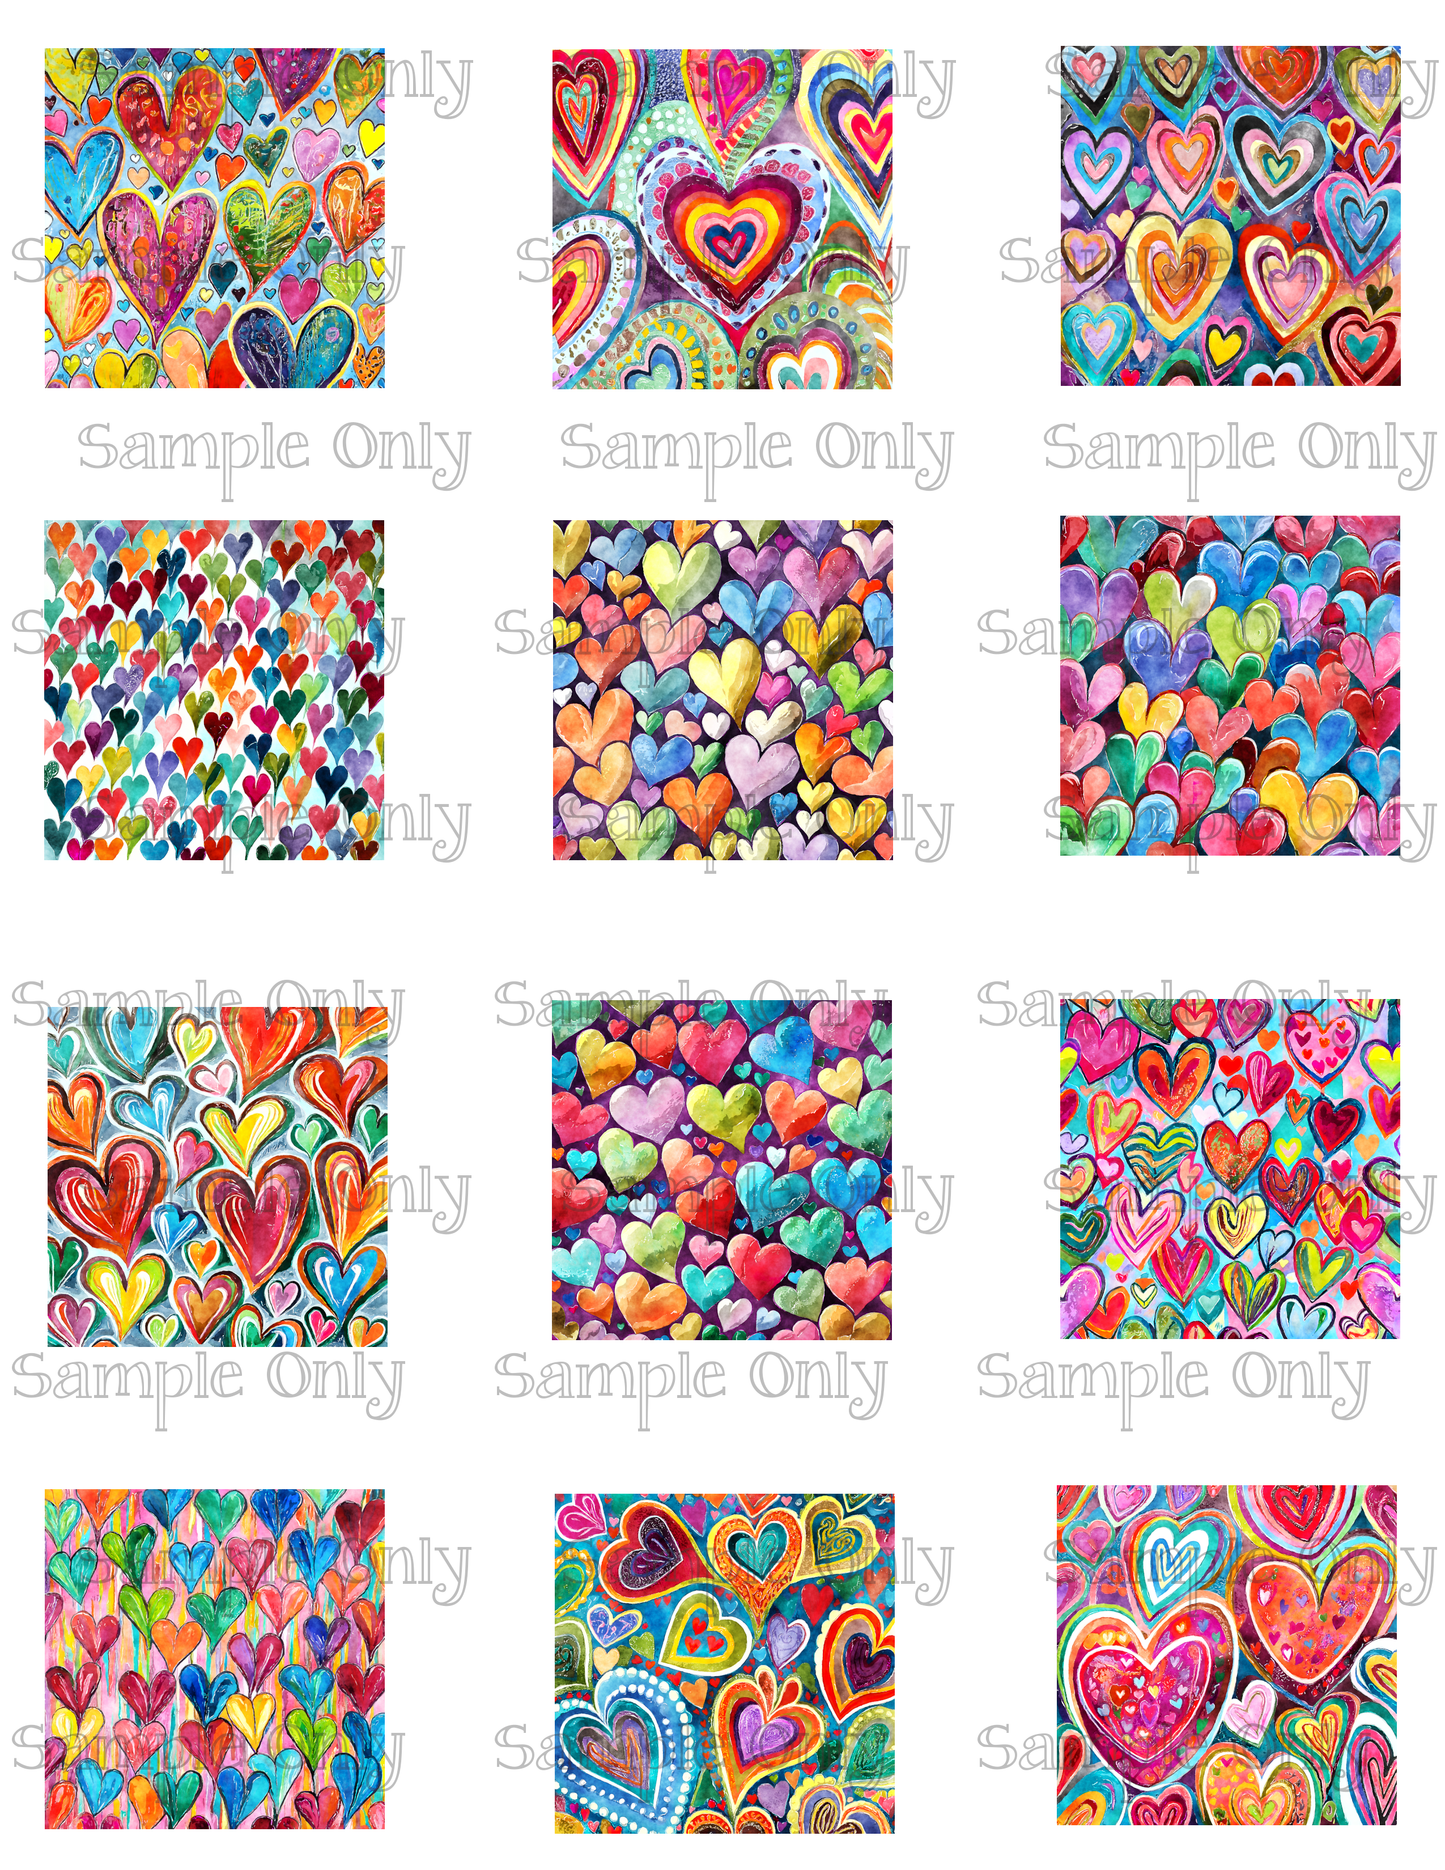 2 Inch Colorful Heart Set 04 Image Sheet For Polymer Clay Transfer Decal DIGITAL FILE OR PRINTED